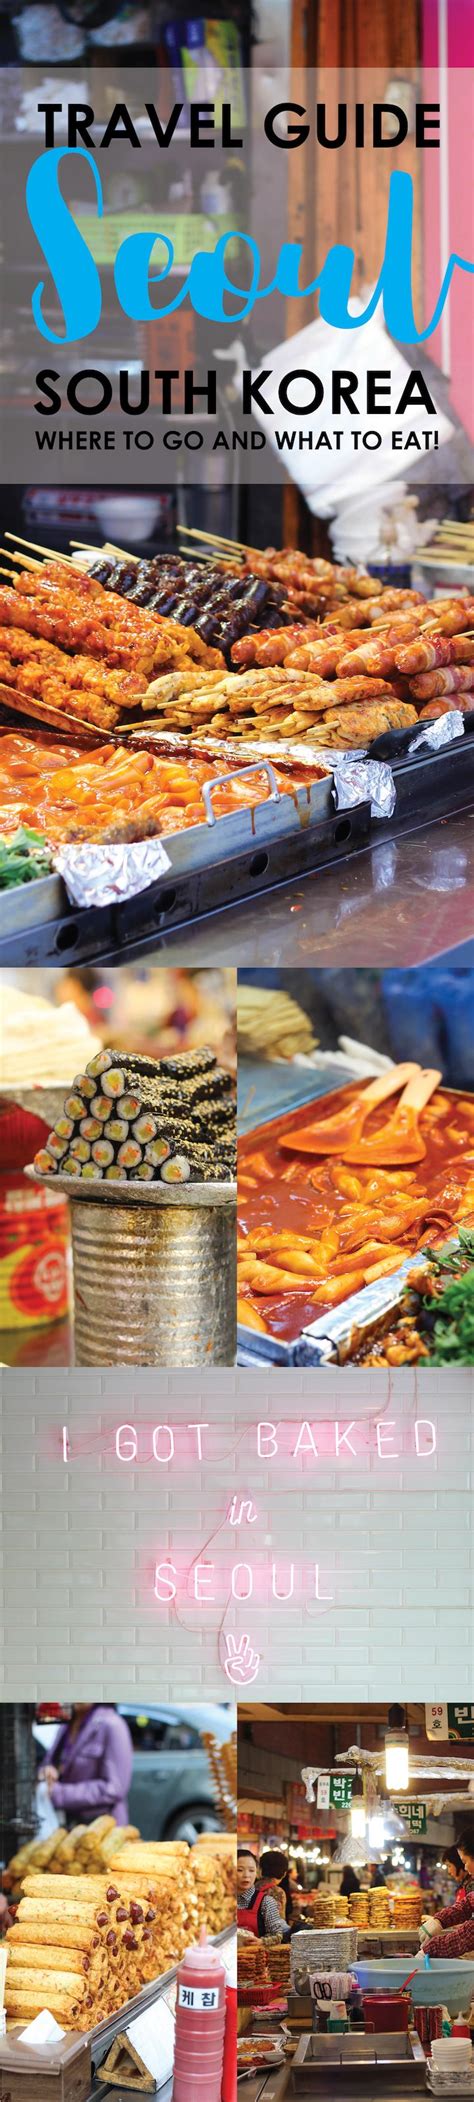 What To Eat In Seoul South Korea The Ultimate Seoul Travel Guide Of